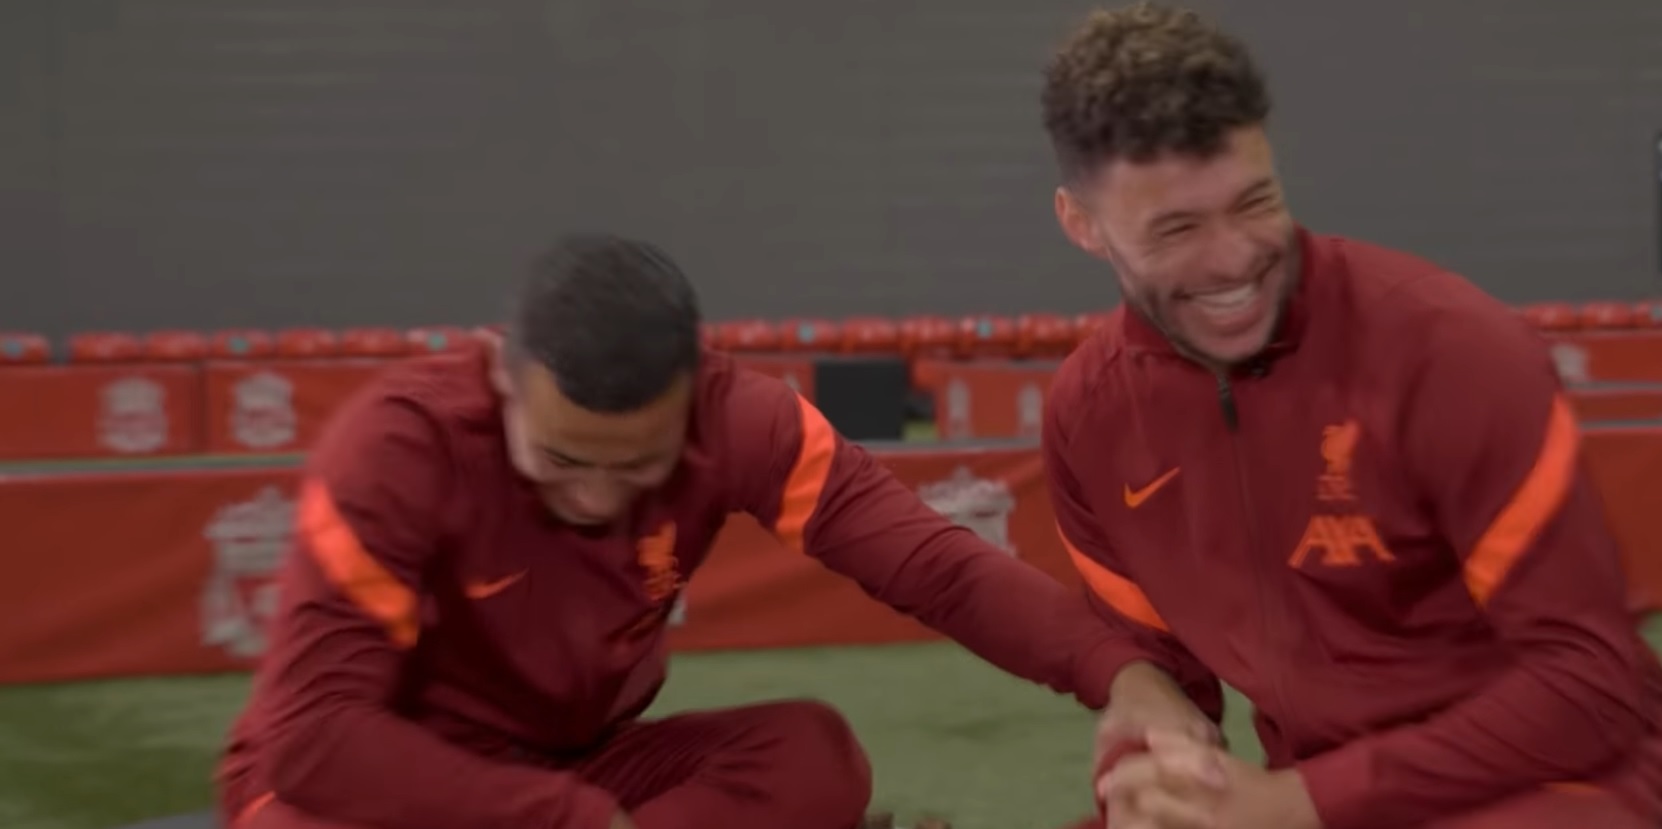 (Video) ‘You’ve disrespected him!’ – Thiago ripped into after blanking on who Little Mix are right next to Oxlade-Chamberlain